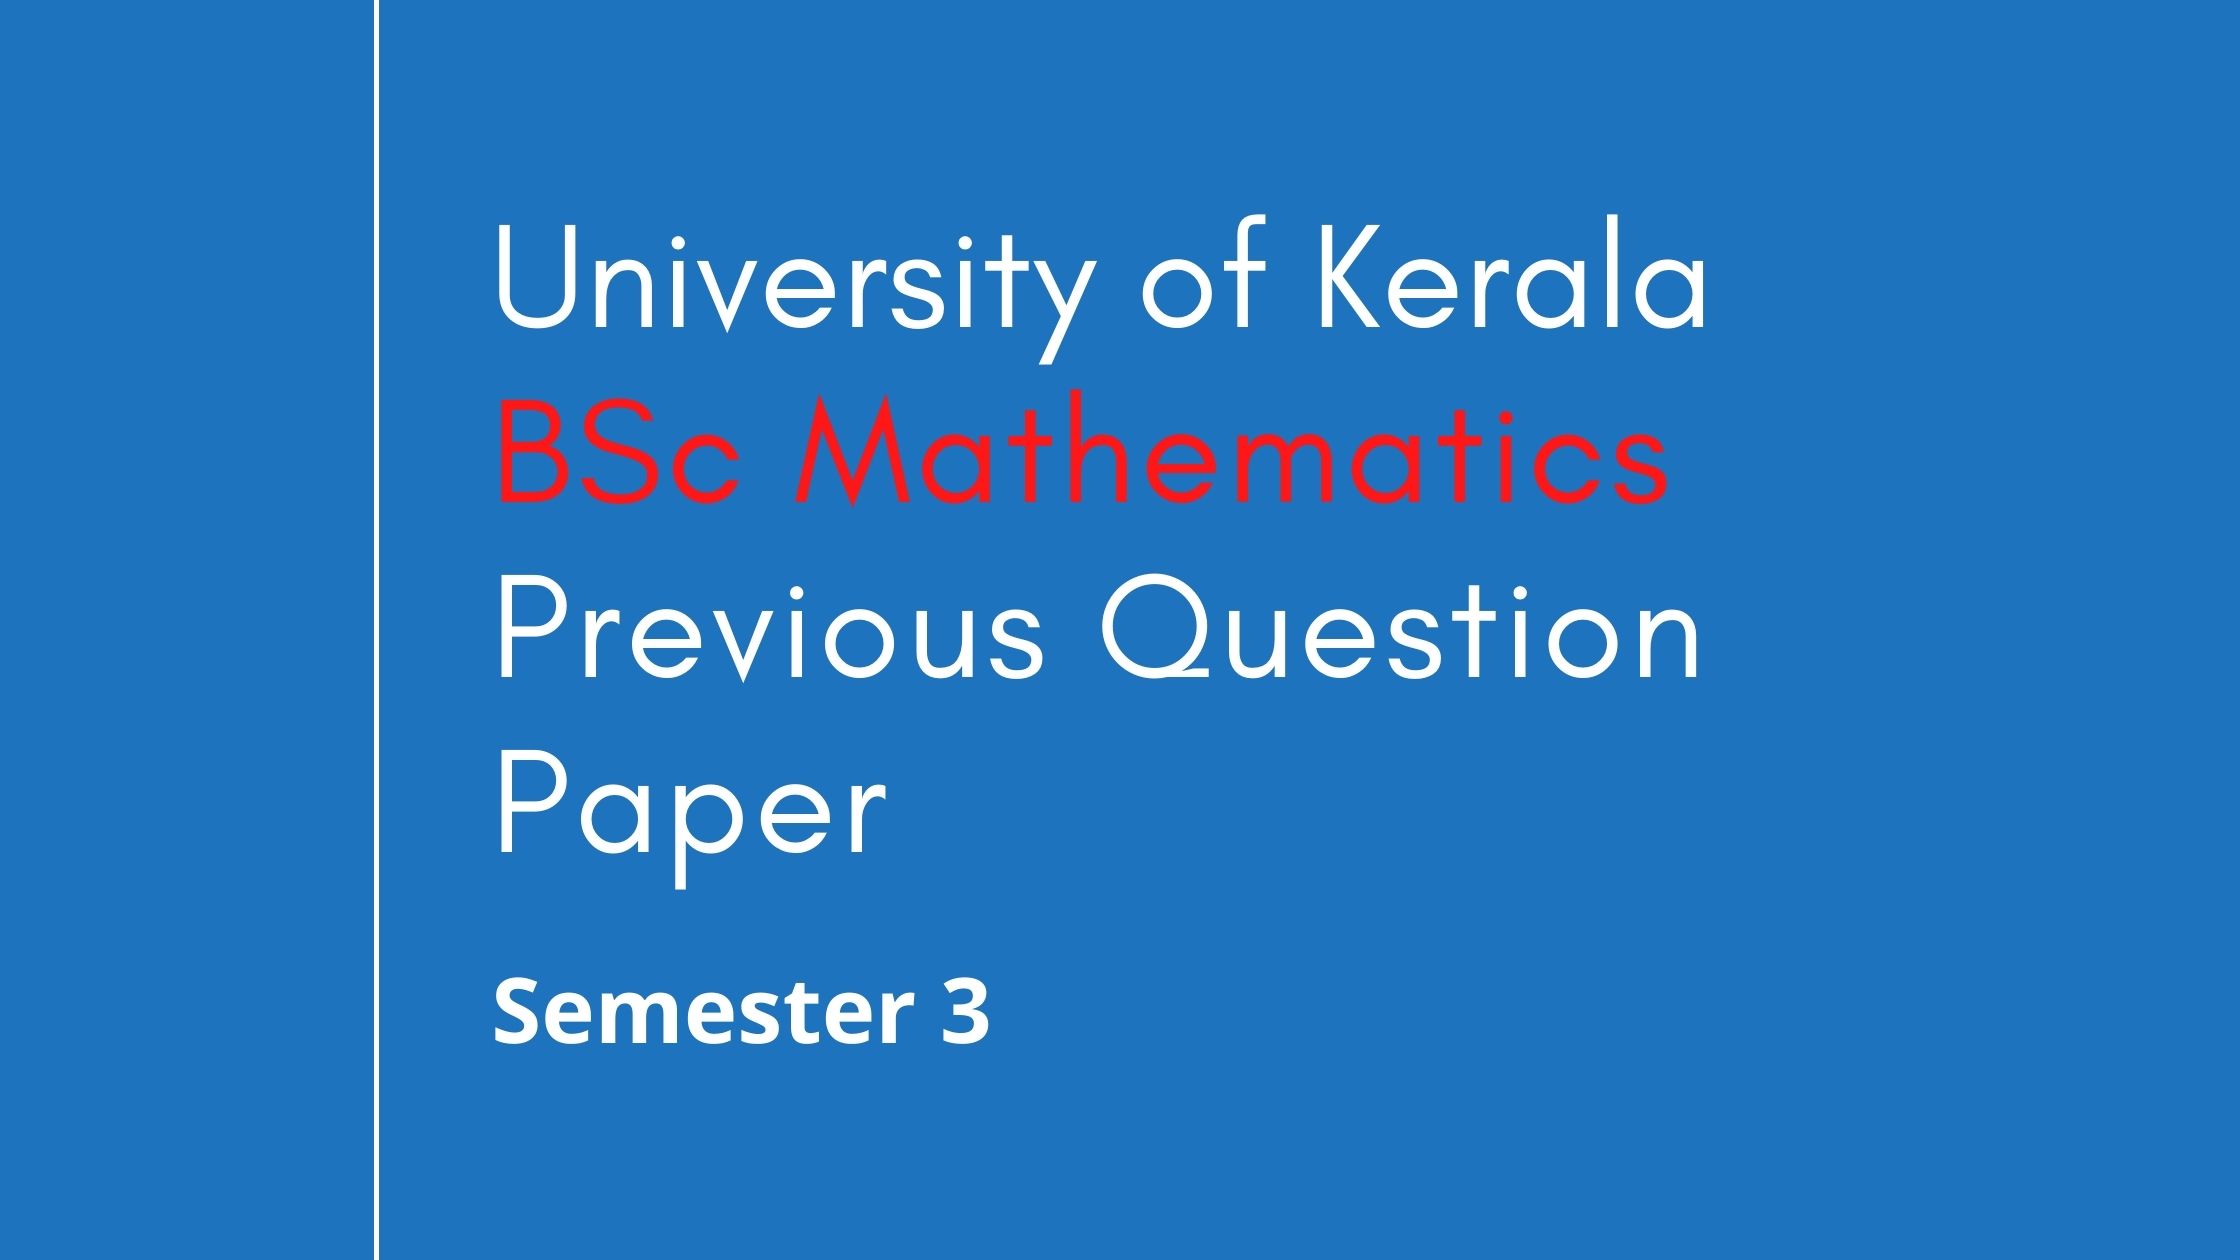 BSc Mathematics Third Semester Previous Year Question Papers of Kerala University